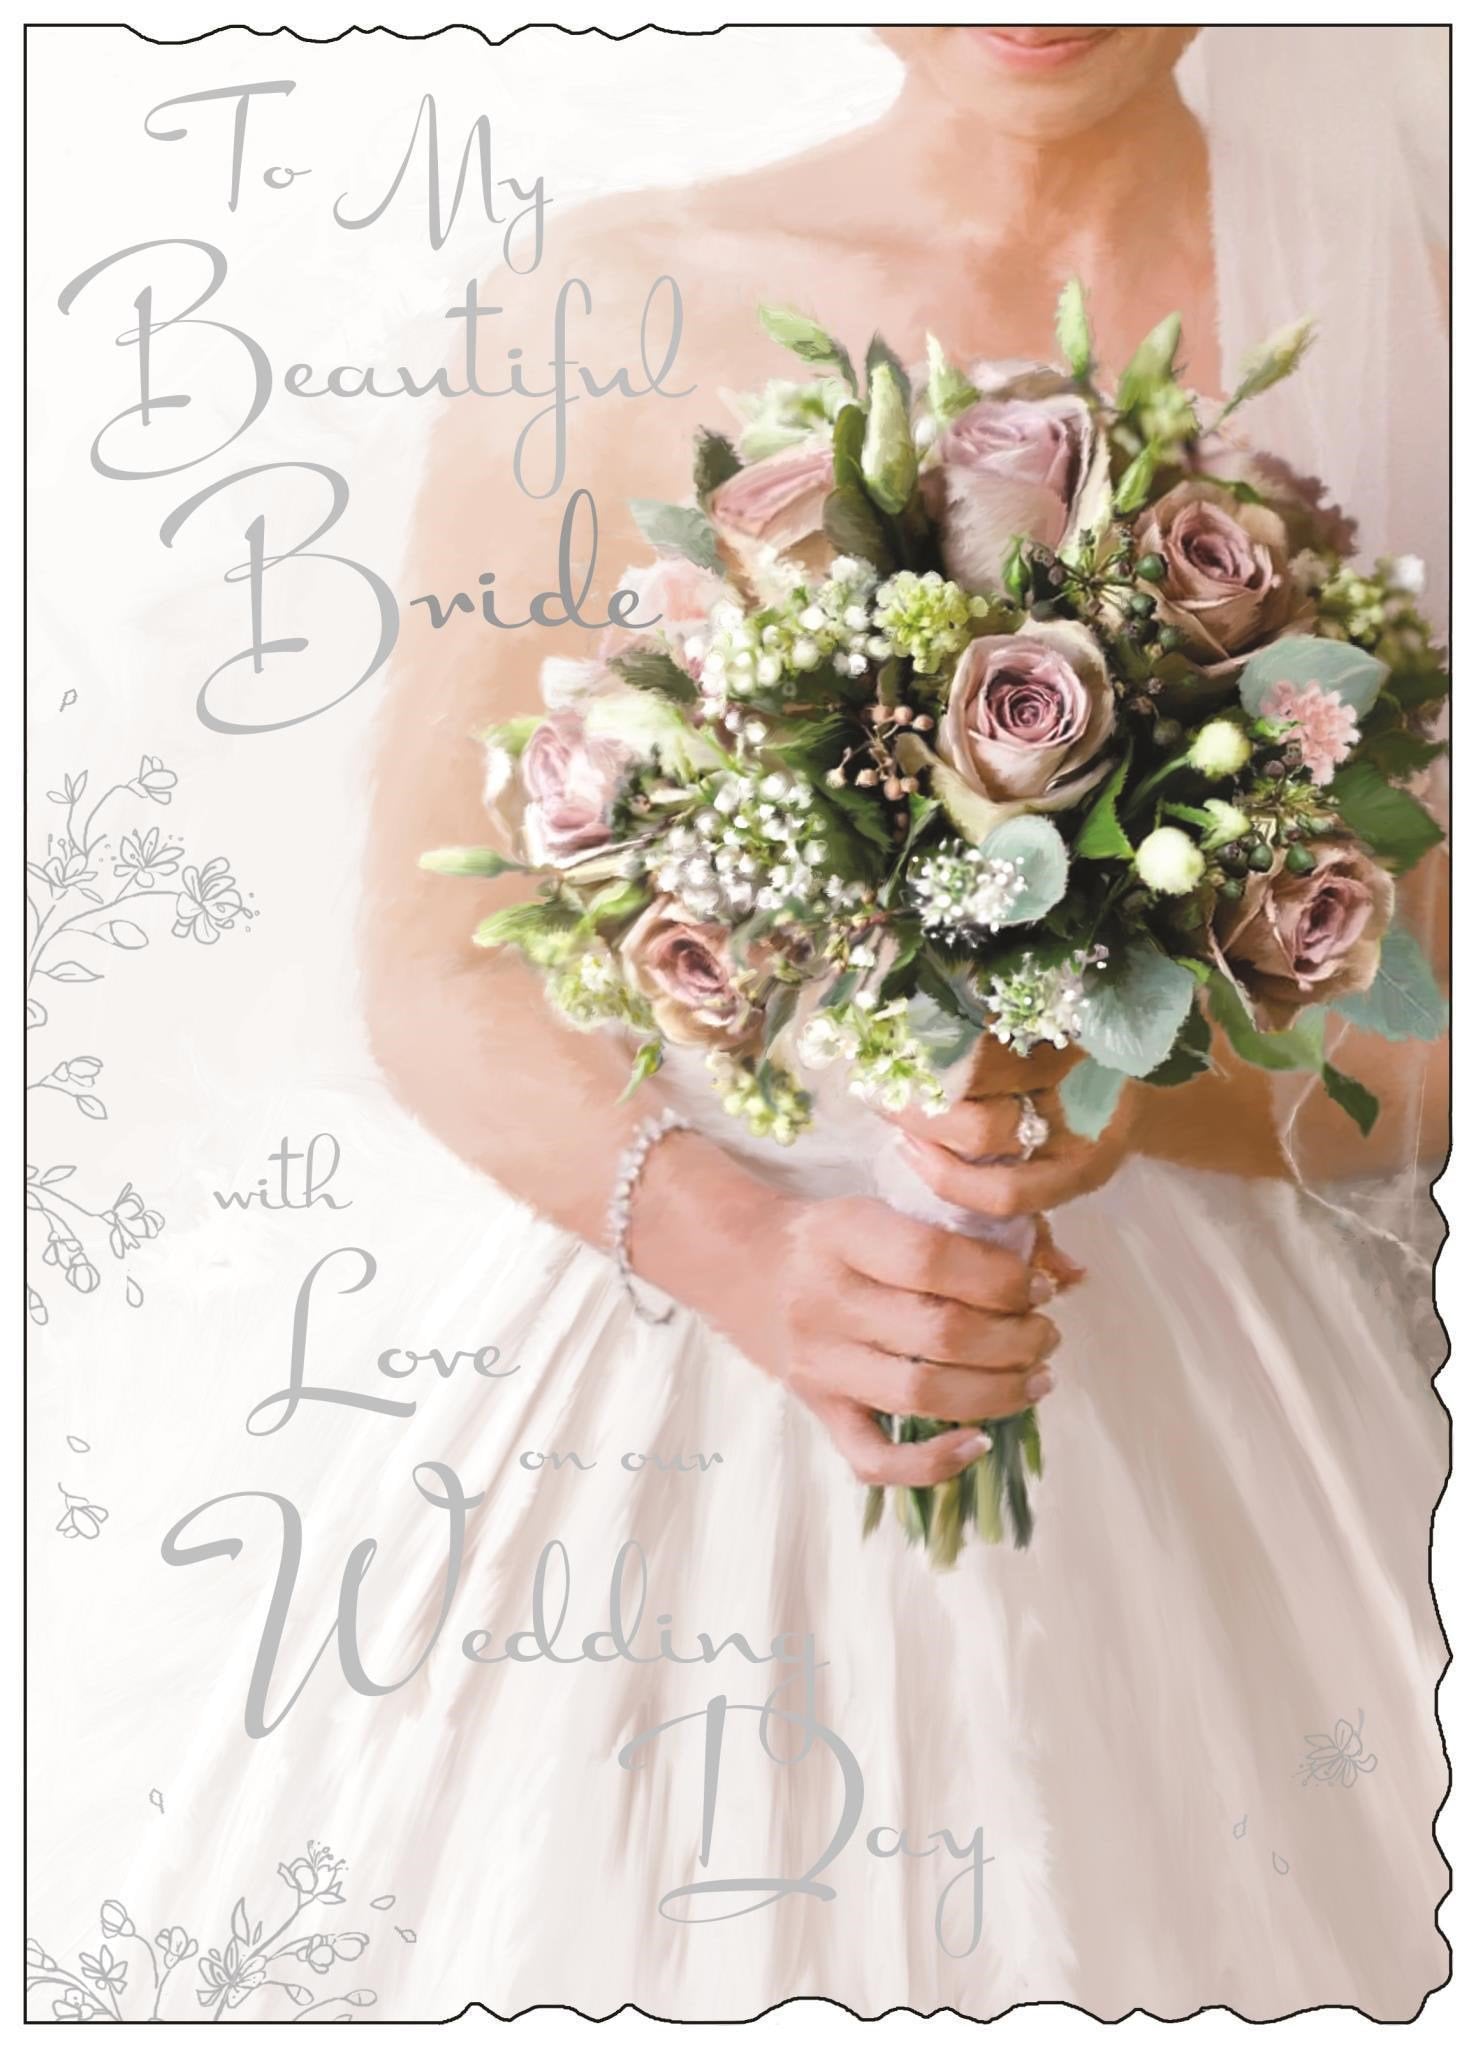 Front of Wedding Bride Bouquet Greetings Card